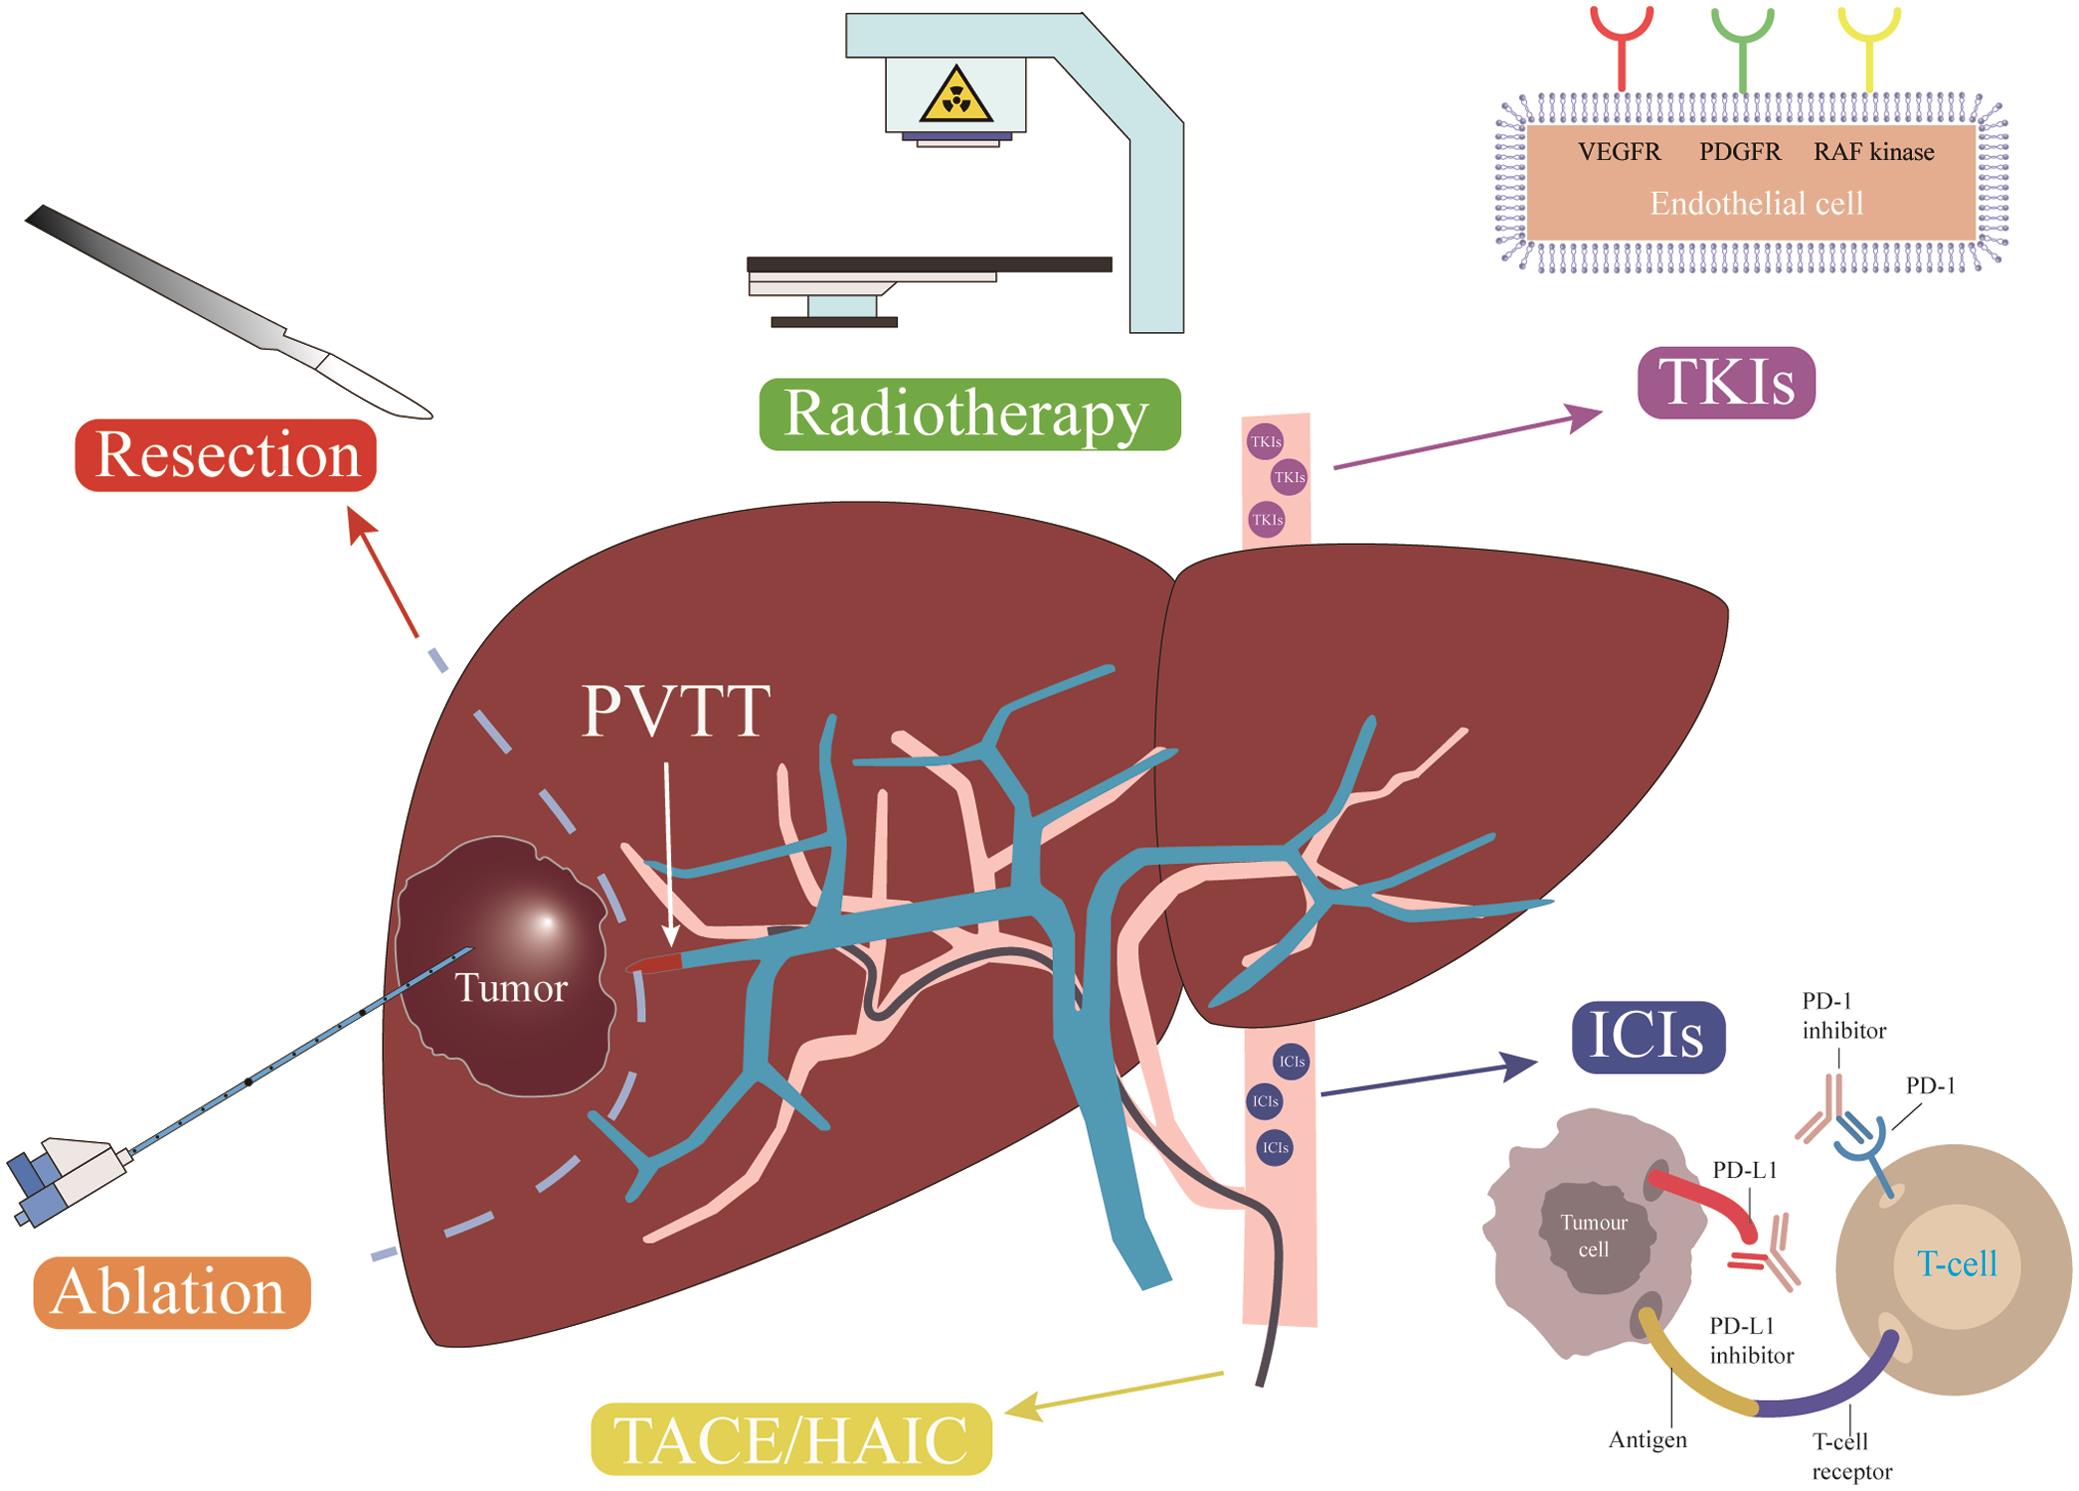 Different therapeutic methods have different mechanisms of action for patients with HCC involving PVTT.